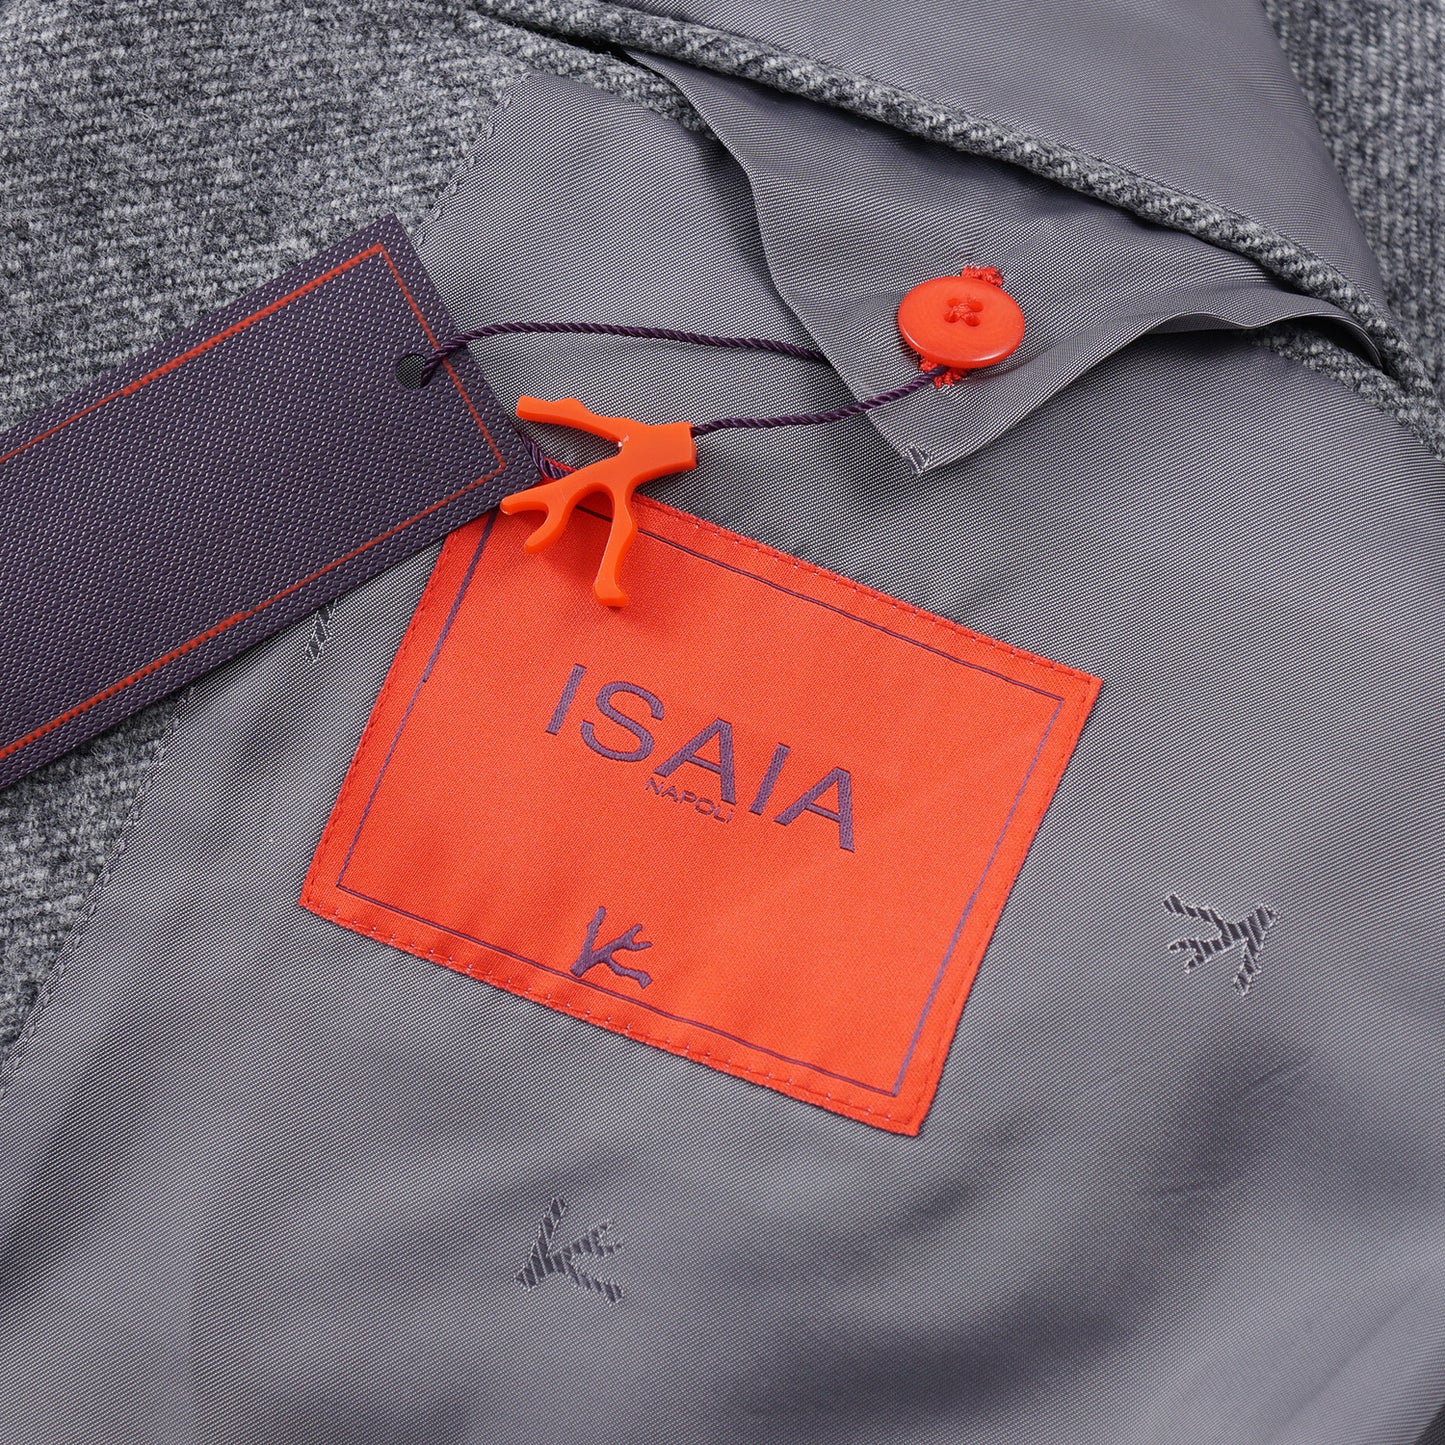 Isaia Gray Wool and Cashmere Overcoat - Top Shelf Apparel